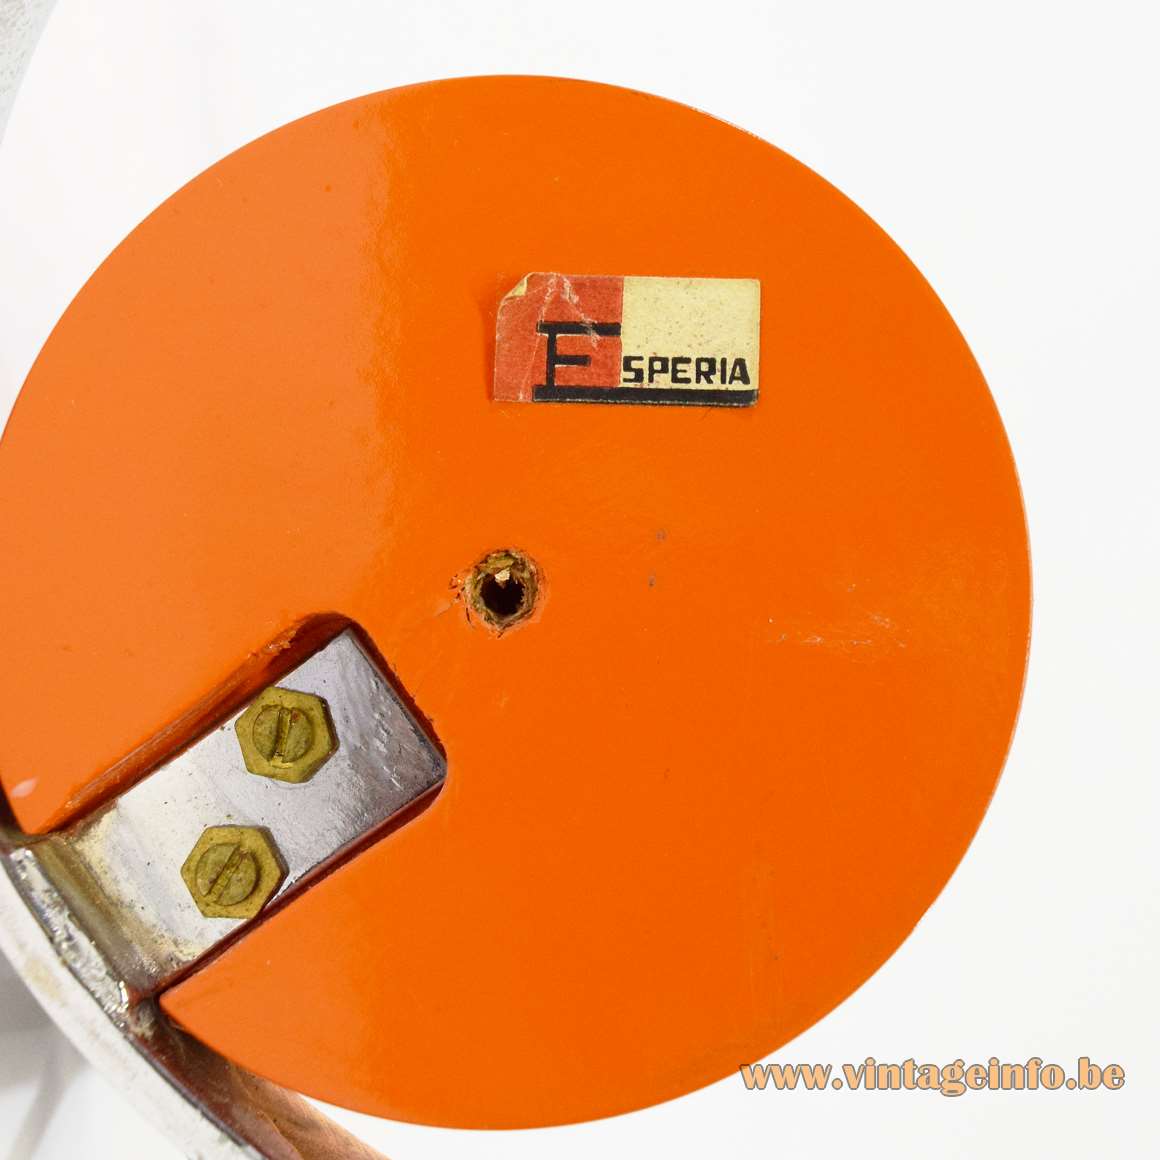 Esperia chrome table lamp with an orange disk - Label